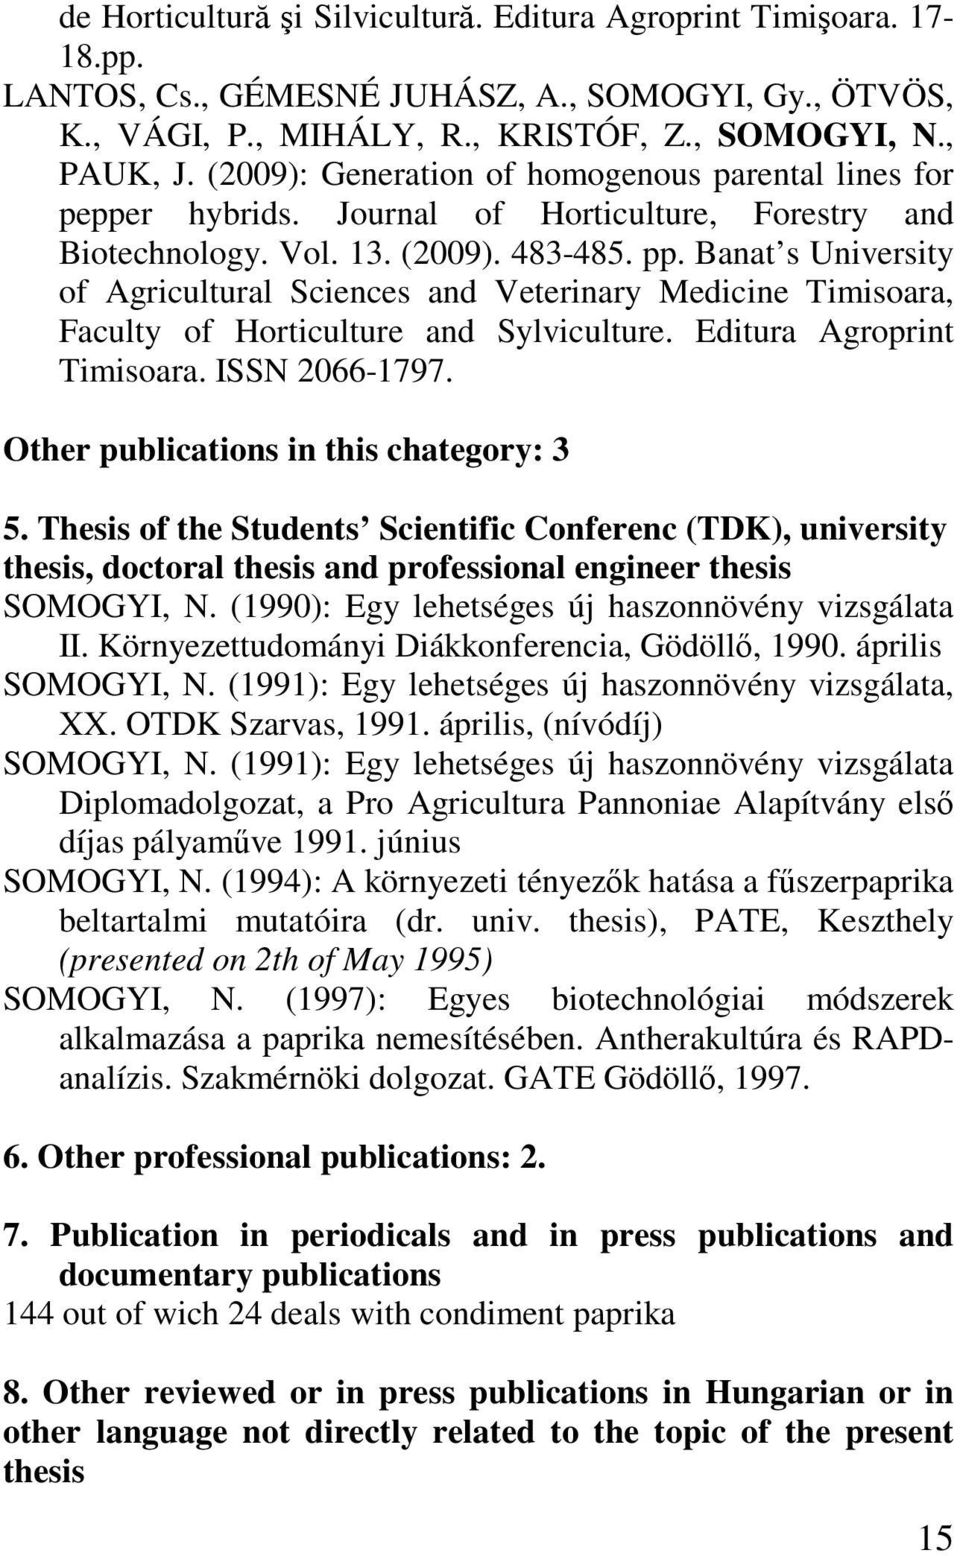 Banat s University of Agricultural Sciences and Veterinary Medicine Timisoara, Faculty of Horticulture and Sylviculture. Editura Agroprint Timisoara. ISSN 2066-1797.